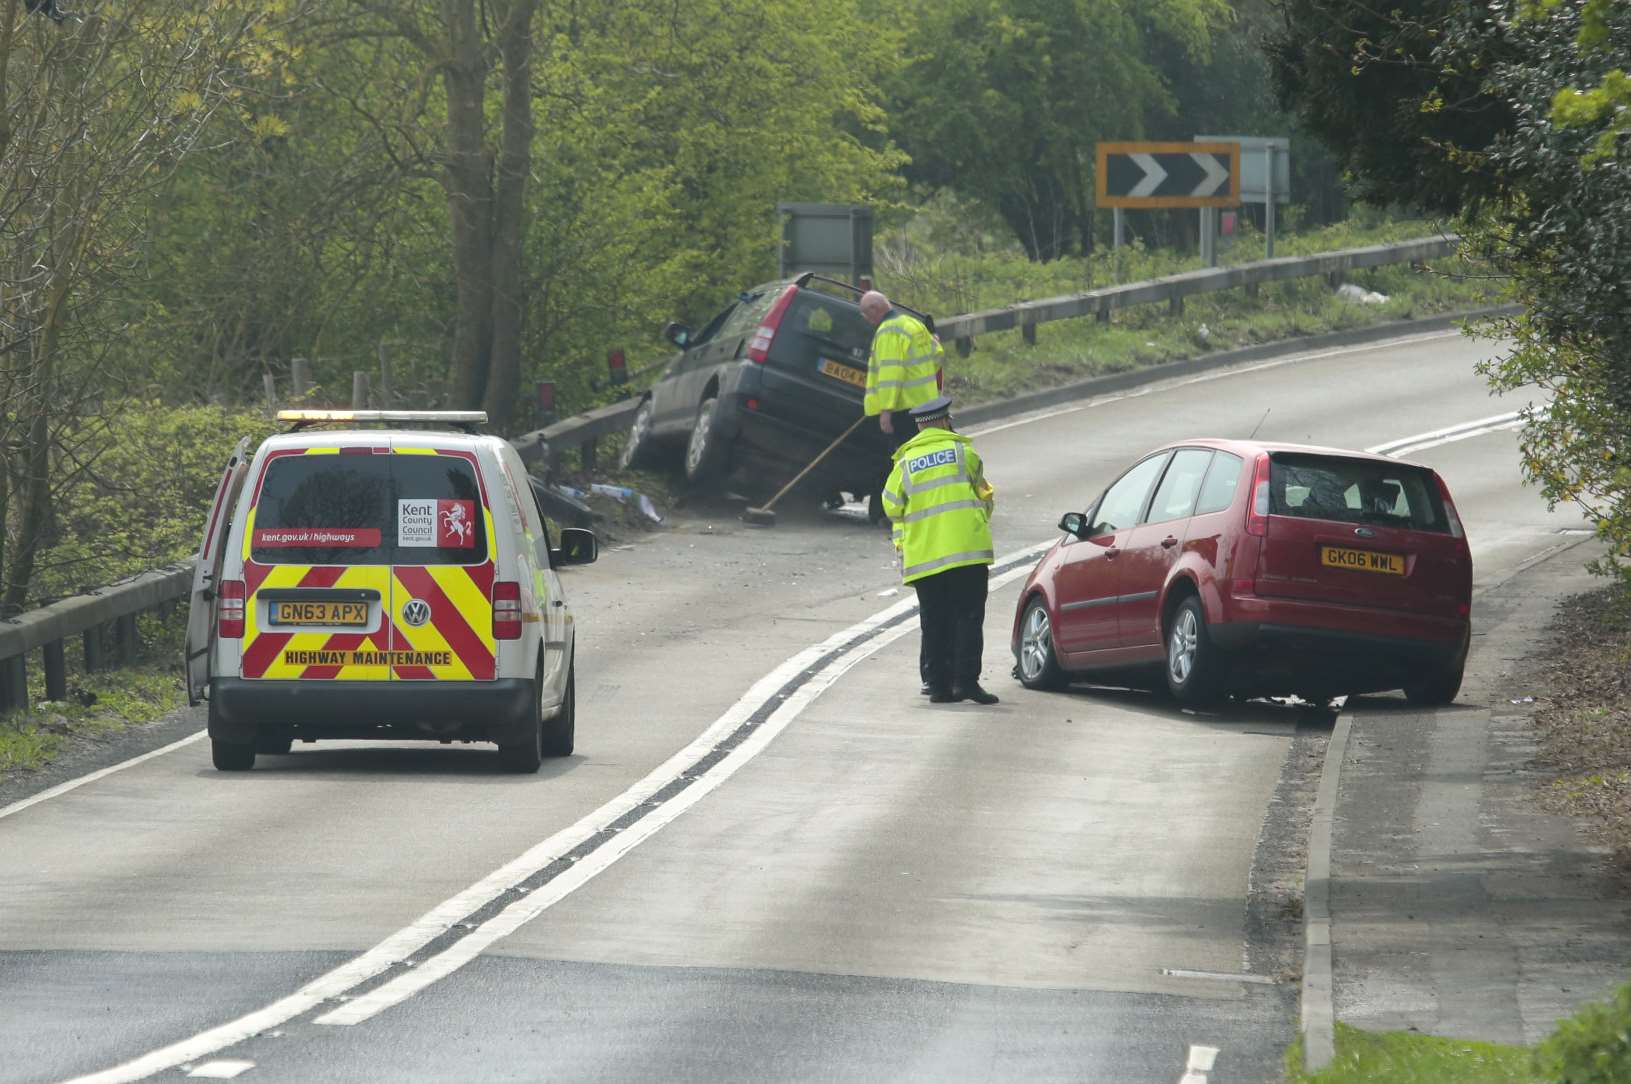 The scene of the accident. Picture: Martin Apps